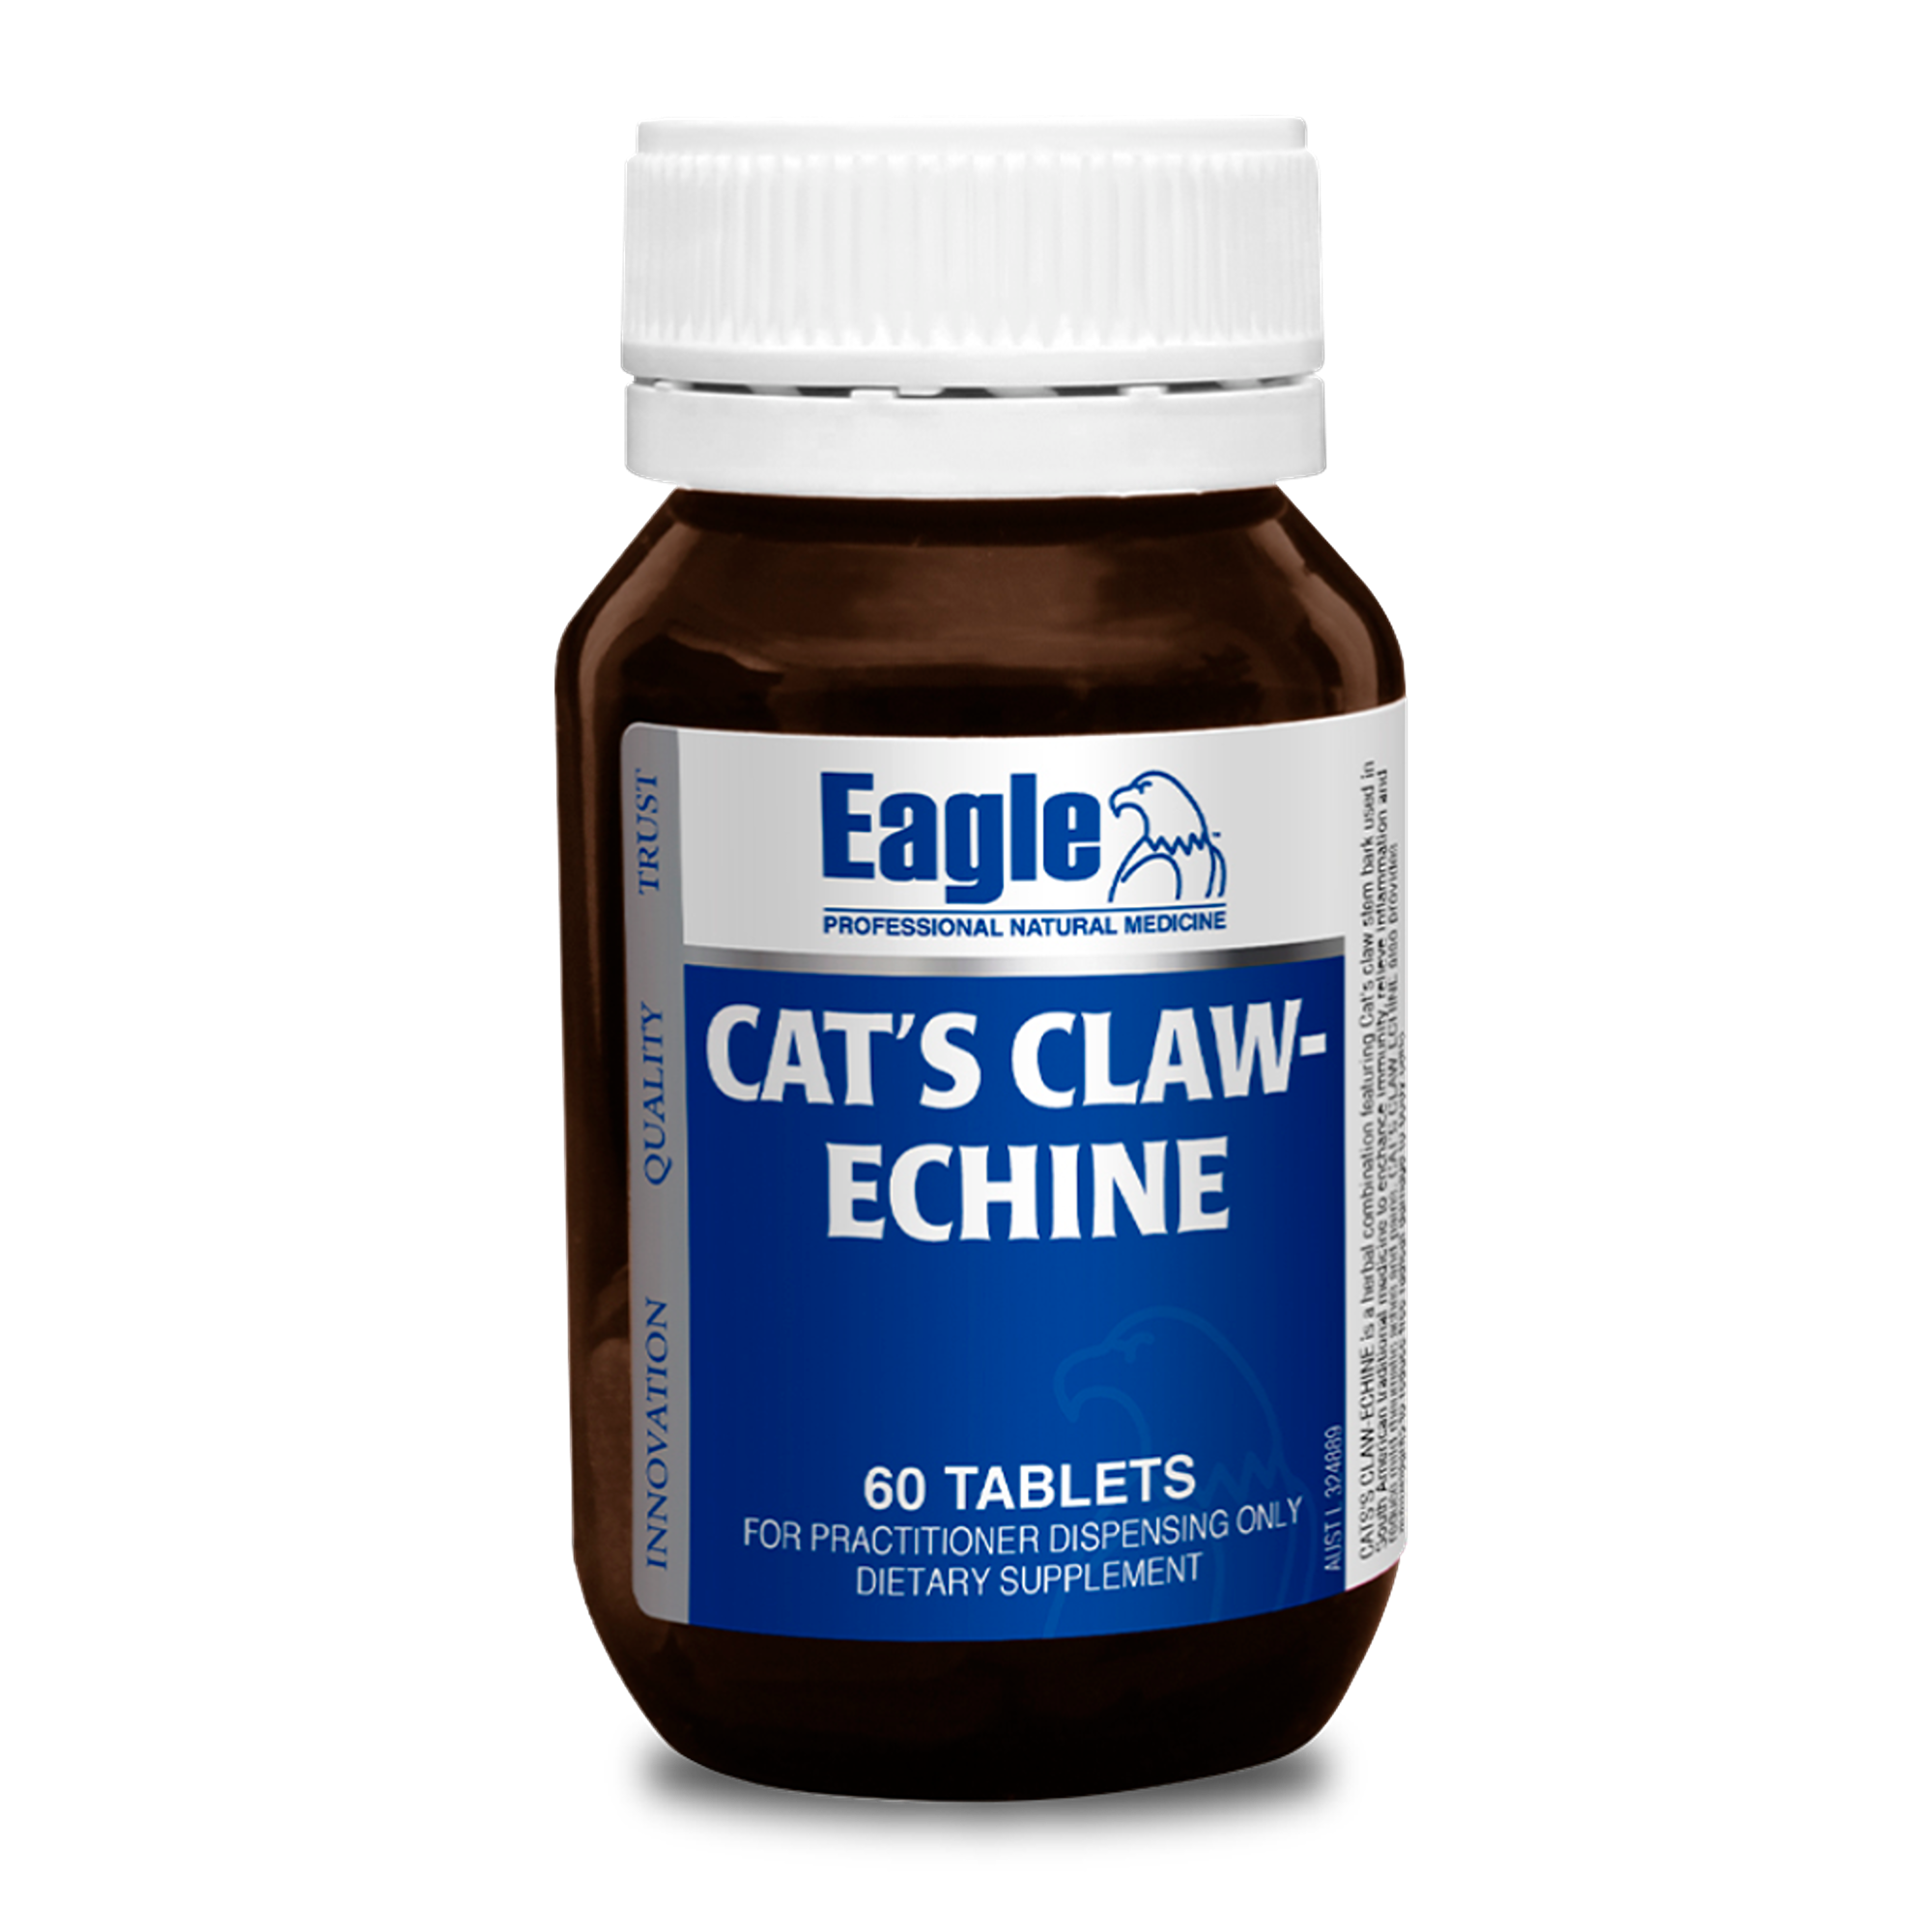 Eagle Cat's Claw-Echine Tablets 60s